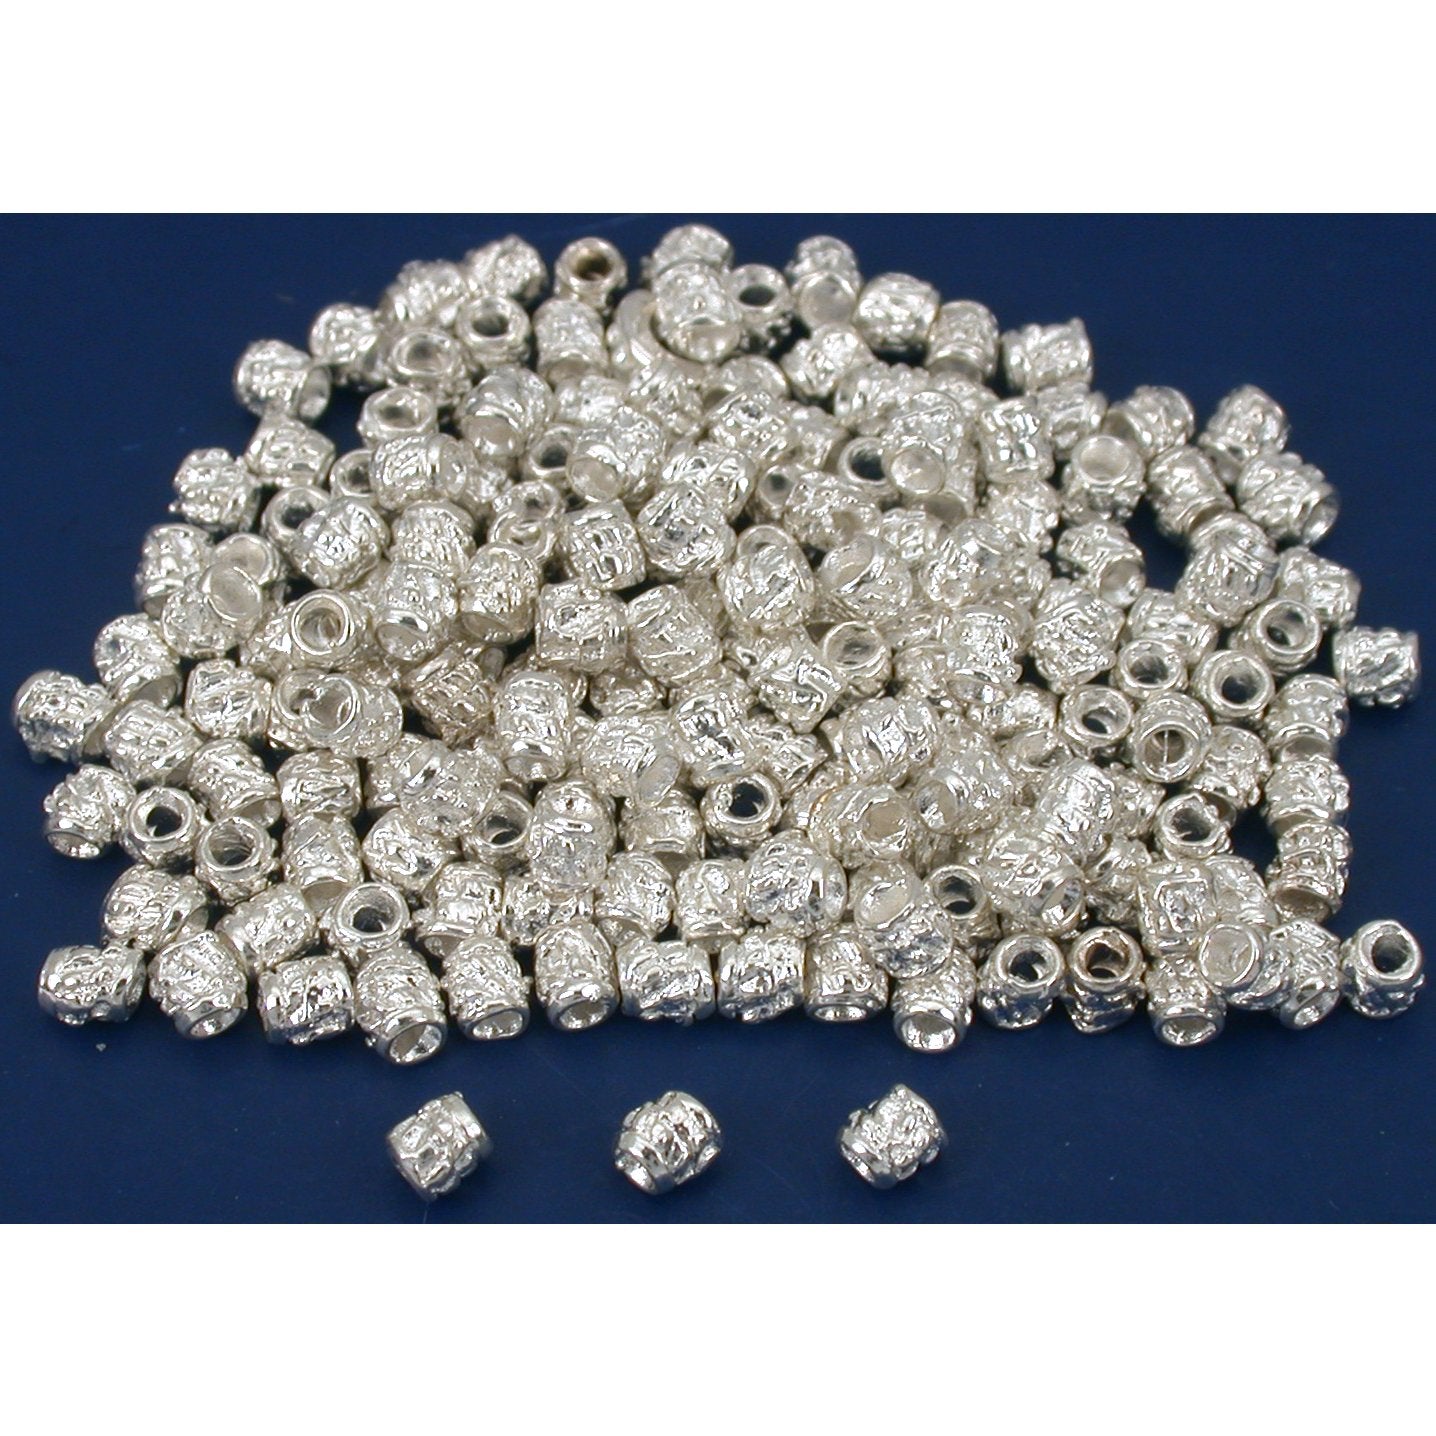 Bali Tube Beads Silver Plated 3mm 185Pcs Approx.